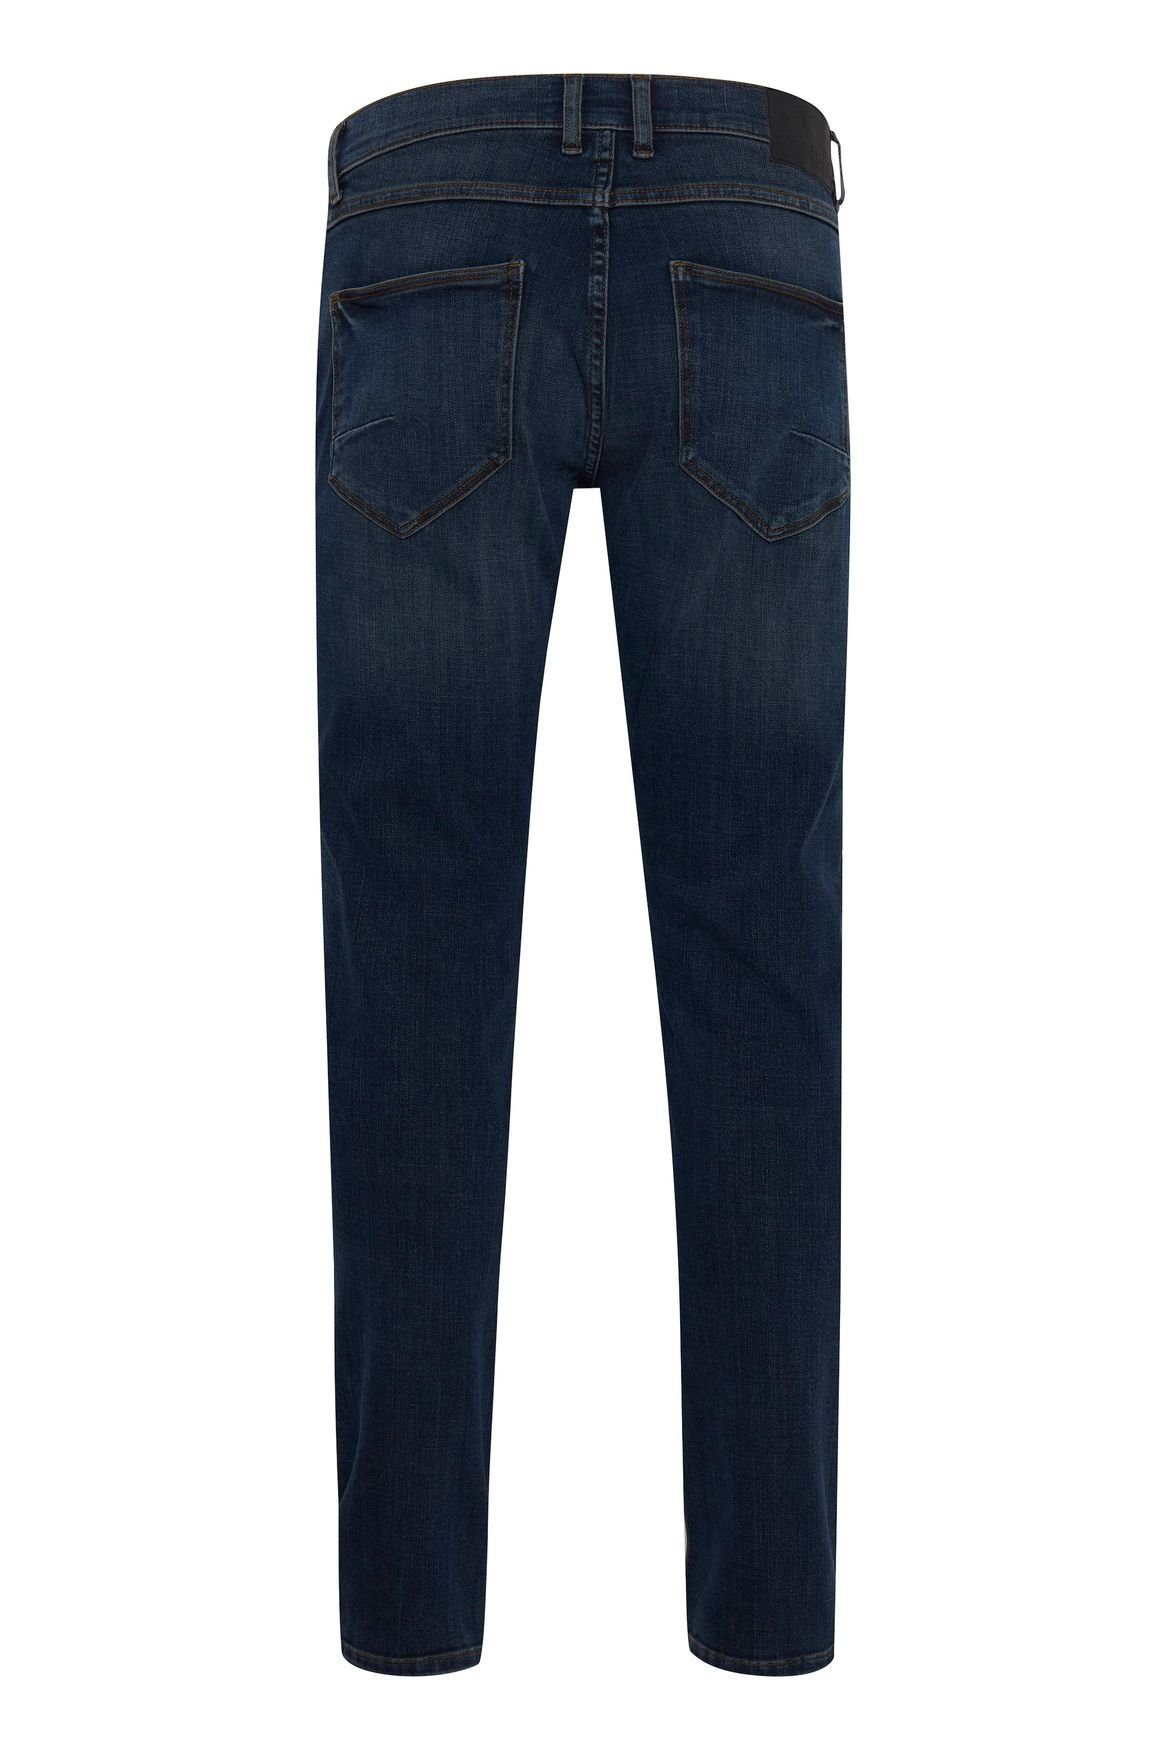 4134 in Dunkelblau (1-tlg) - !Solid 21105829 JEANS Slim-fit-Jeans